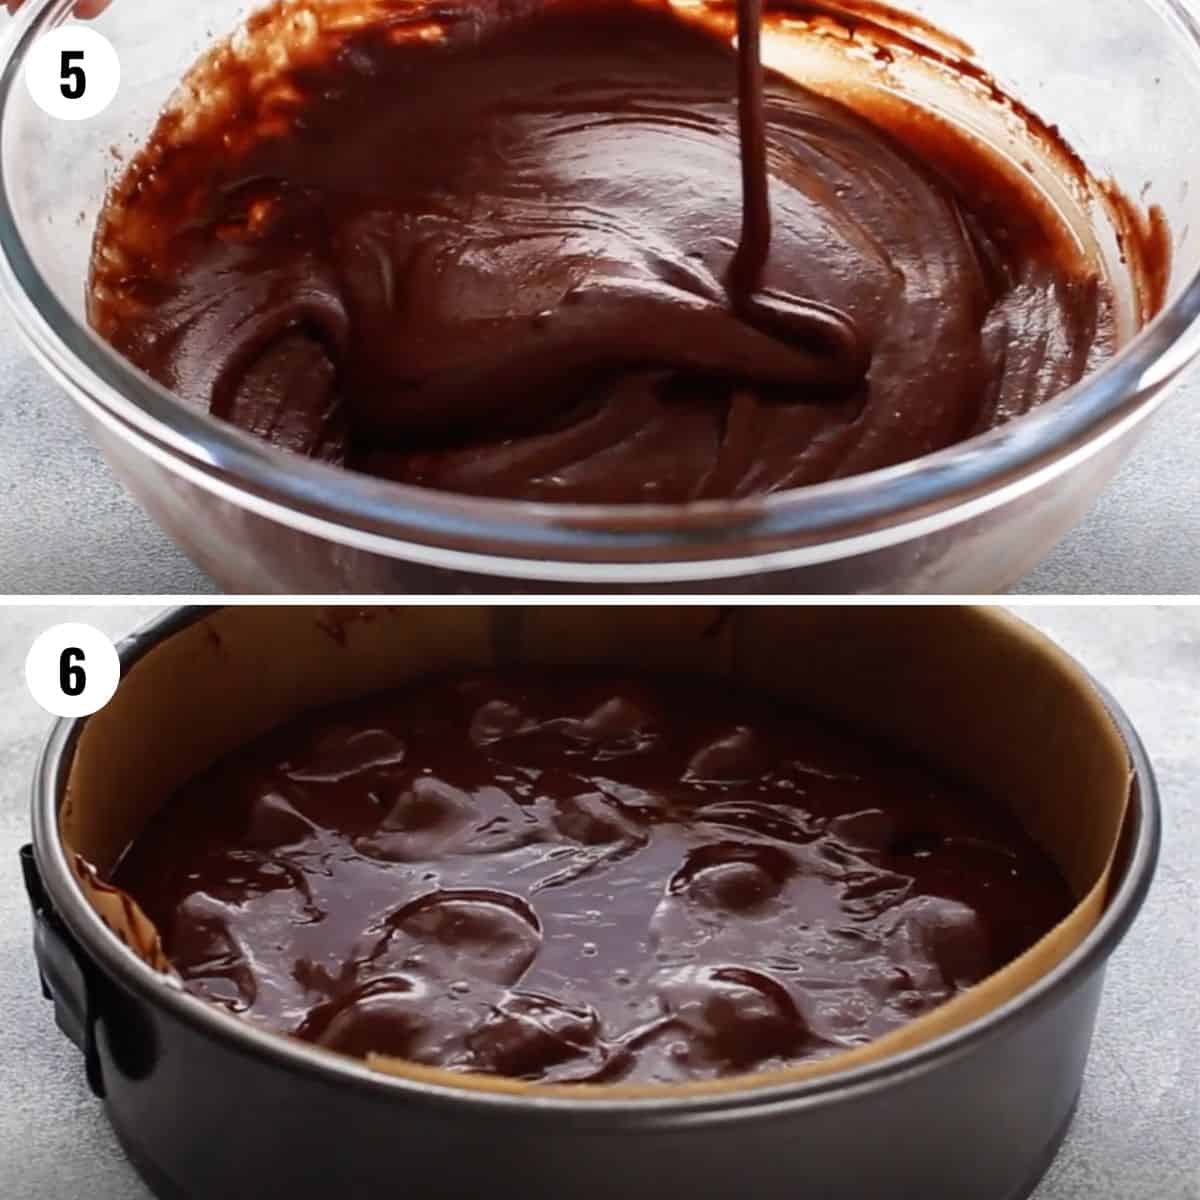 A collage after the chocolate Easter cake batter is mixed and then poured into a pan.